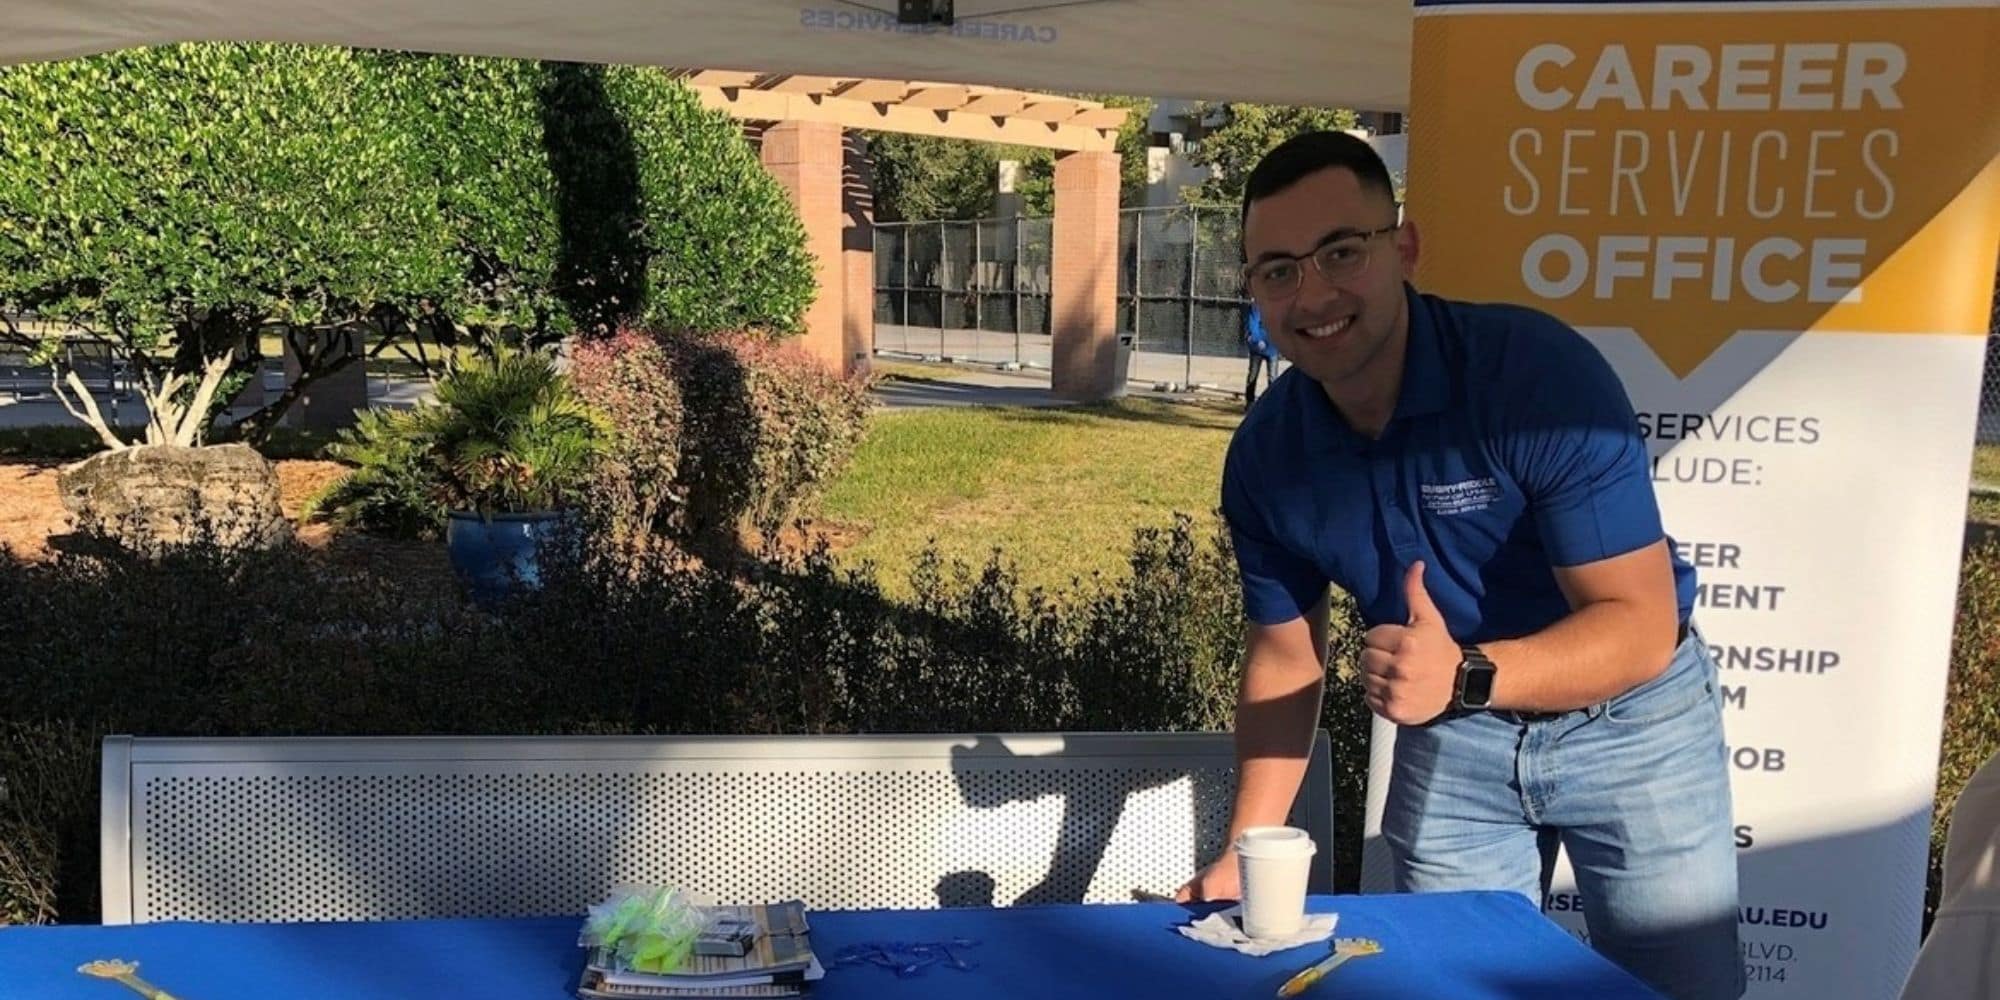 Aviation Business Administration alumnus Alex Guerrero ('20) is now working at The Boeing Company in the Supply Chain Foundation Program. (Photo: Alex Guerrero)